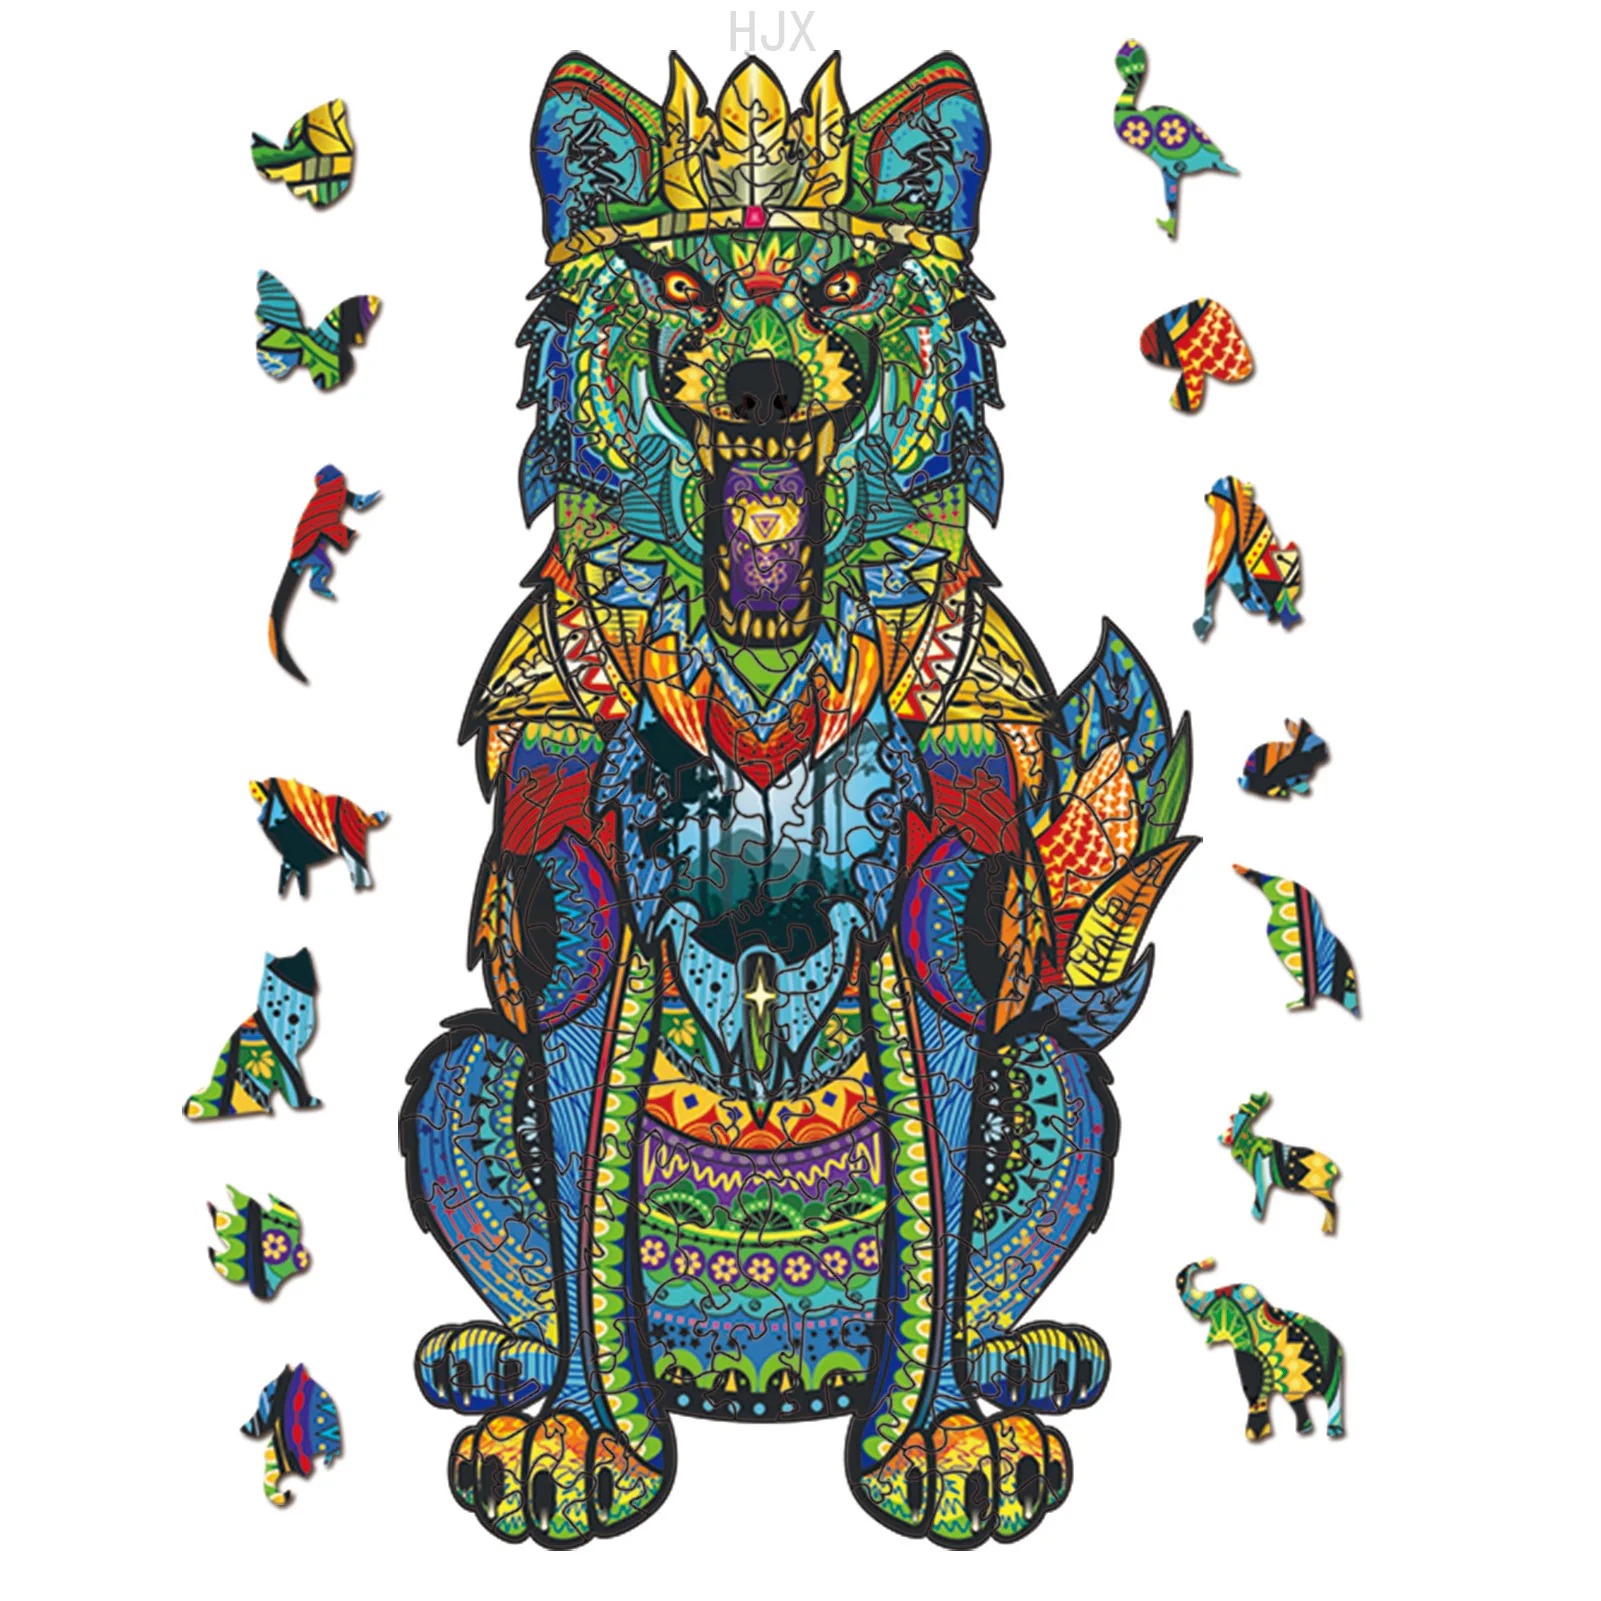 Wood Toys Wolf King Art Picture Jigsaw Puzzle for Kids Animal Wooden Puzzles Learning Educational Toy Boys Girls Children Adults new japanese copybook lettering calligraphy book write exercise book for children adults repeat learning practice books